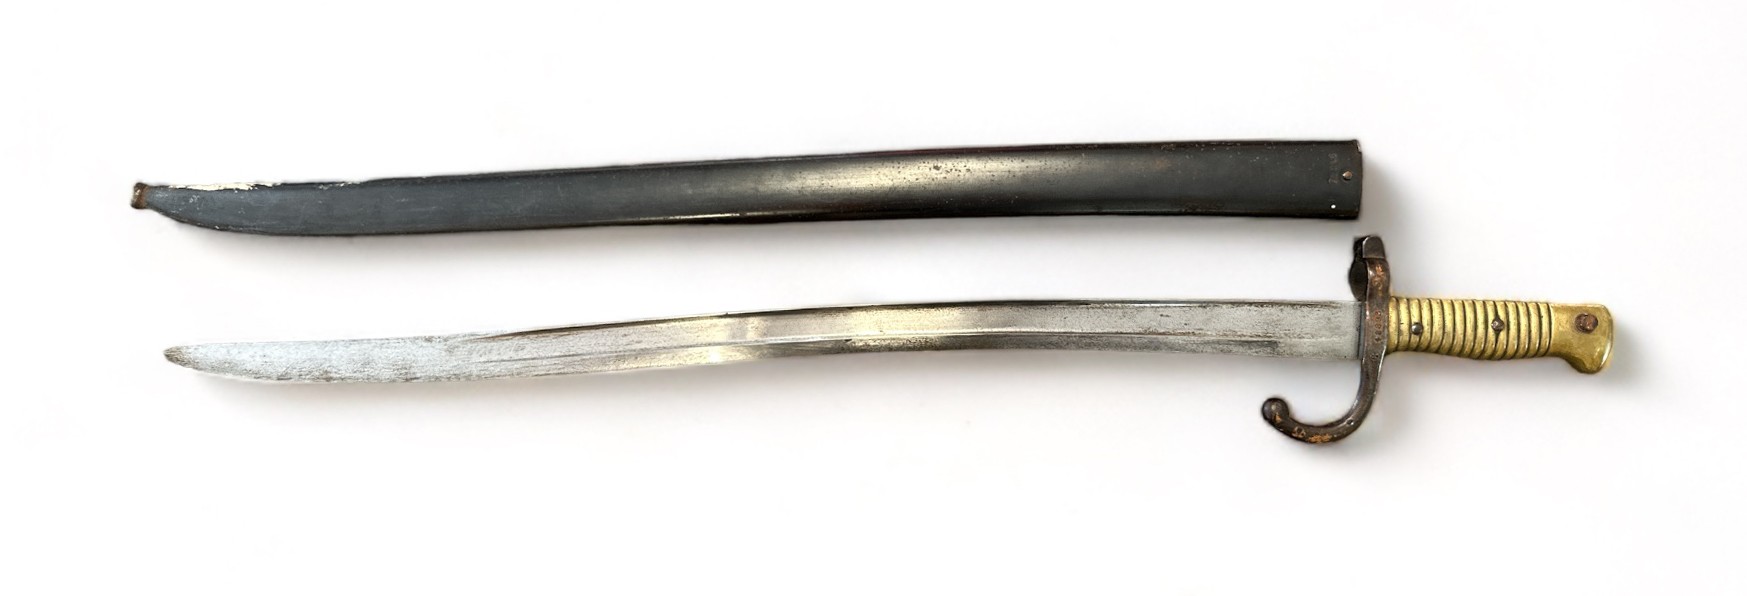 French 1866 pattern chassepot bayonet and scabbard, blade 57cm. Spine of blade marked for 1868.